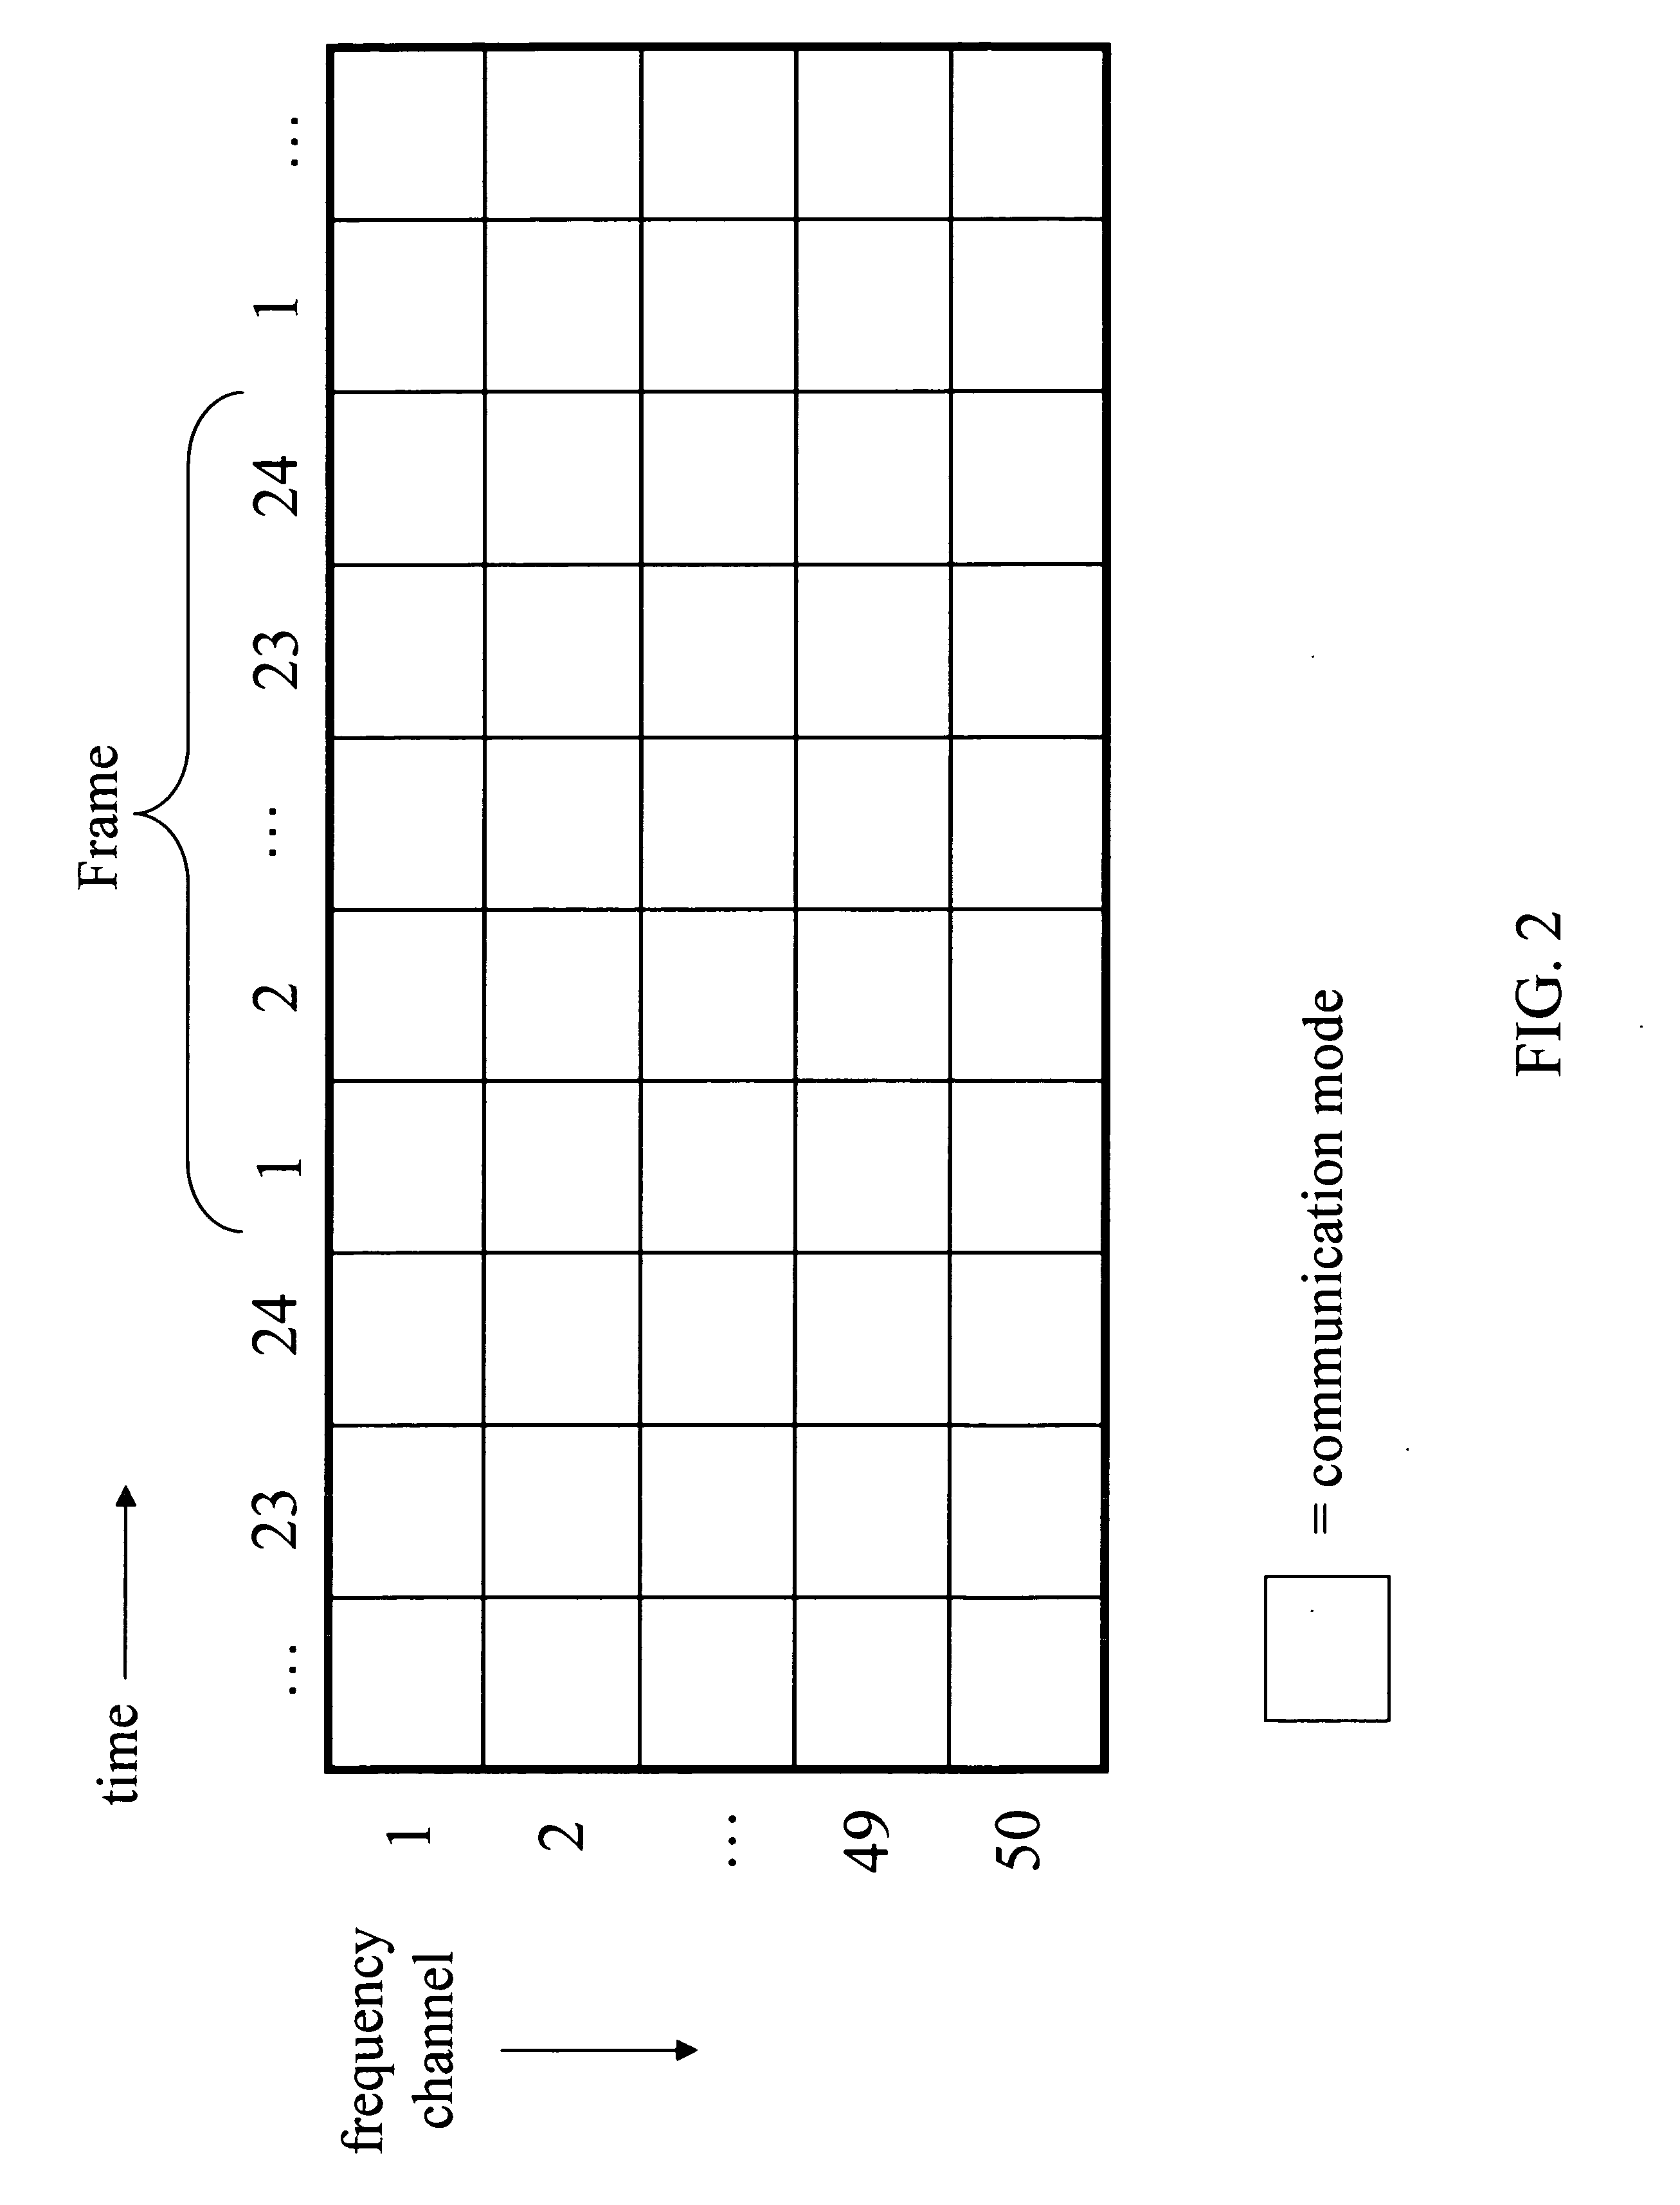 Wireless communication system and related methods